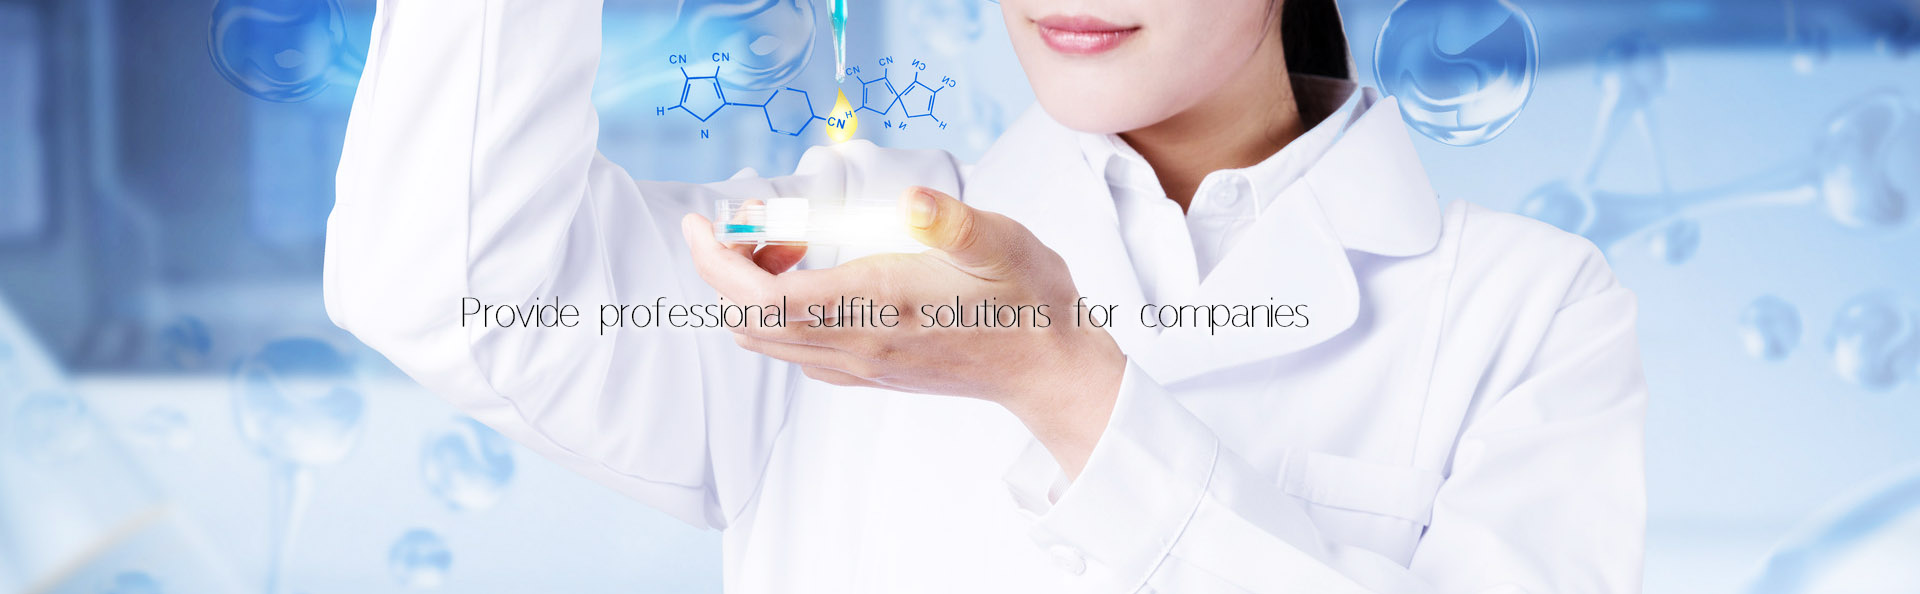 Provide professional sulfite solutions for companies